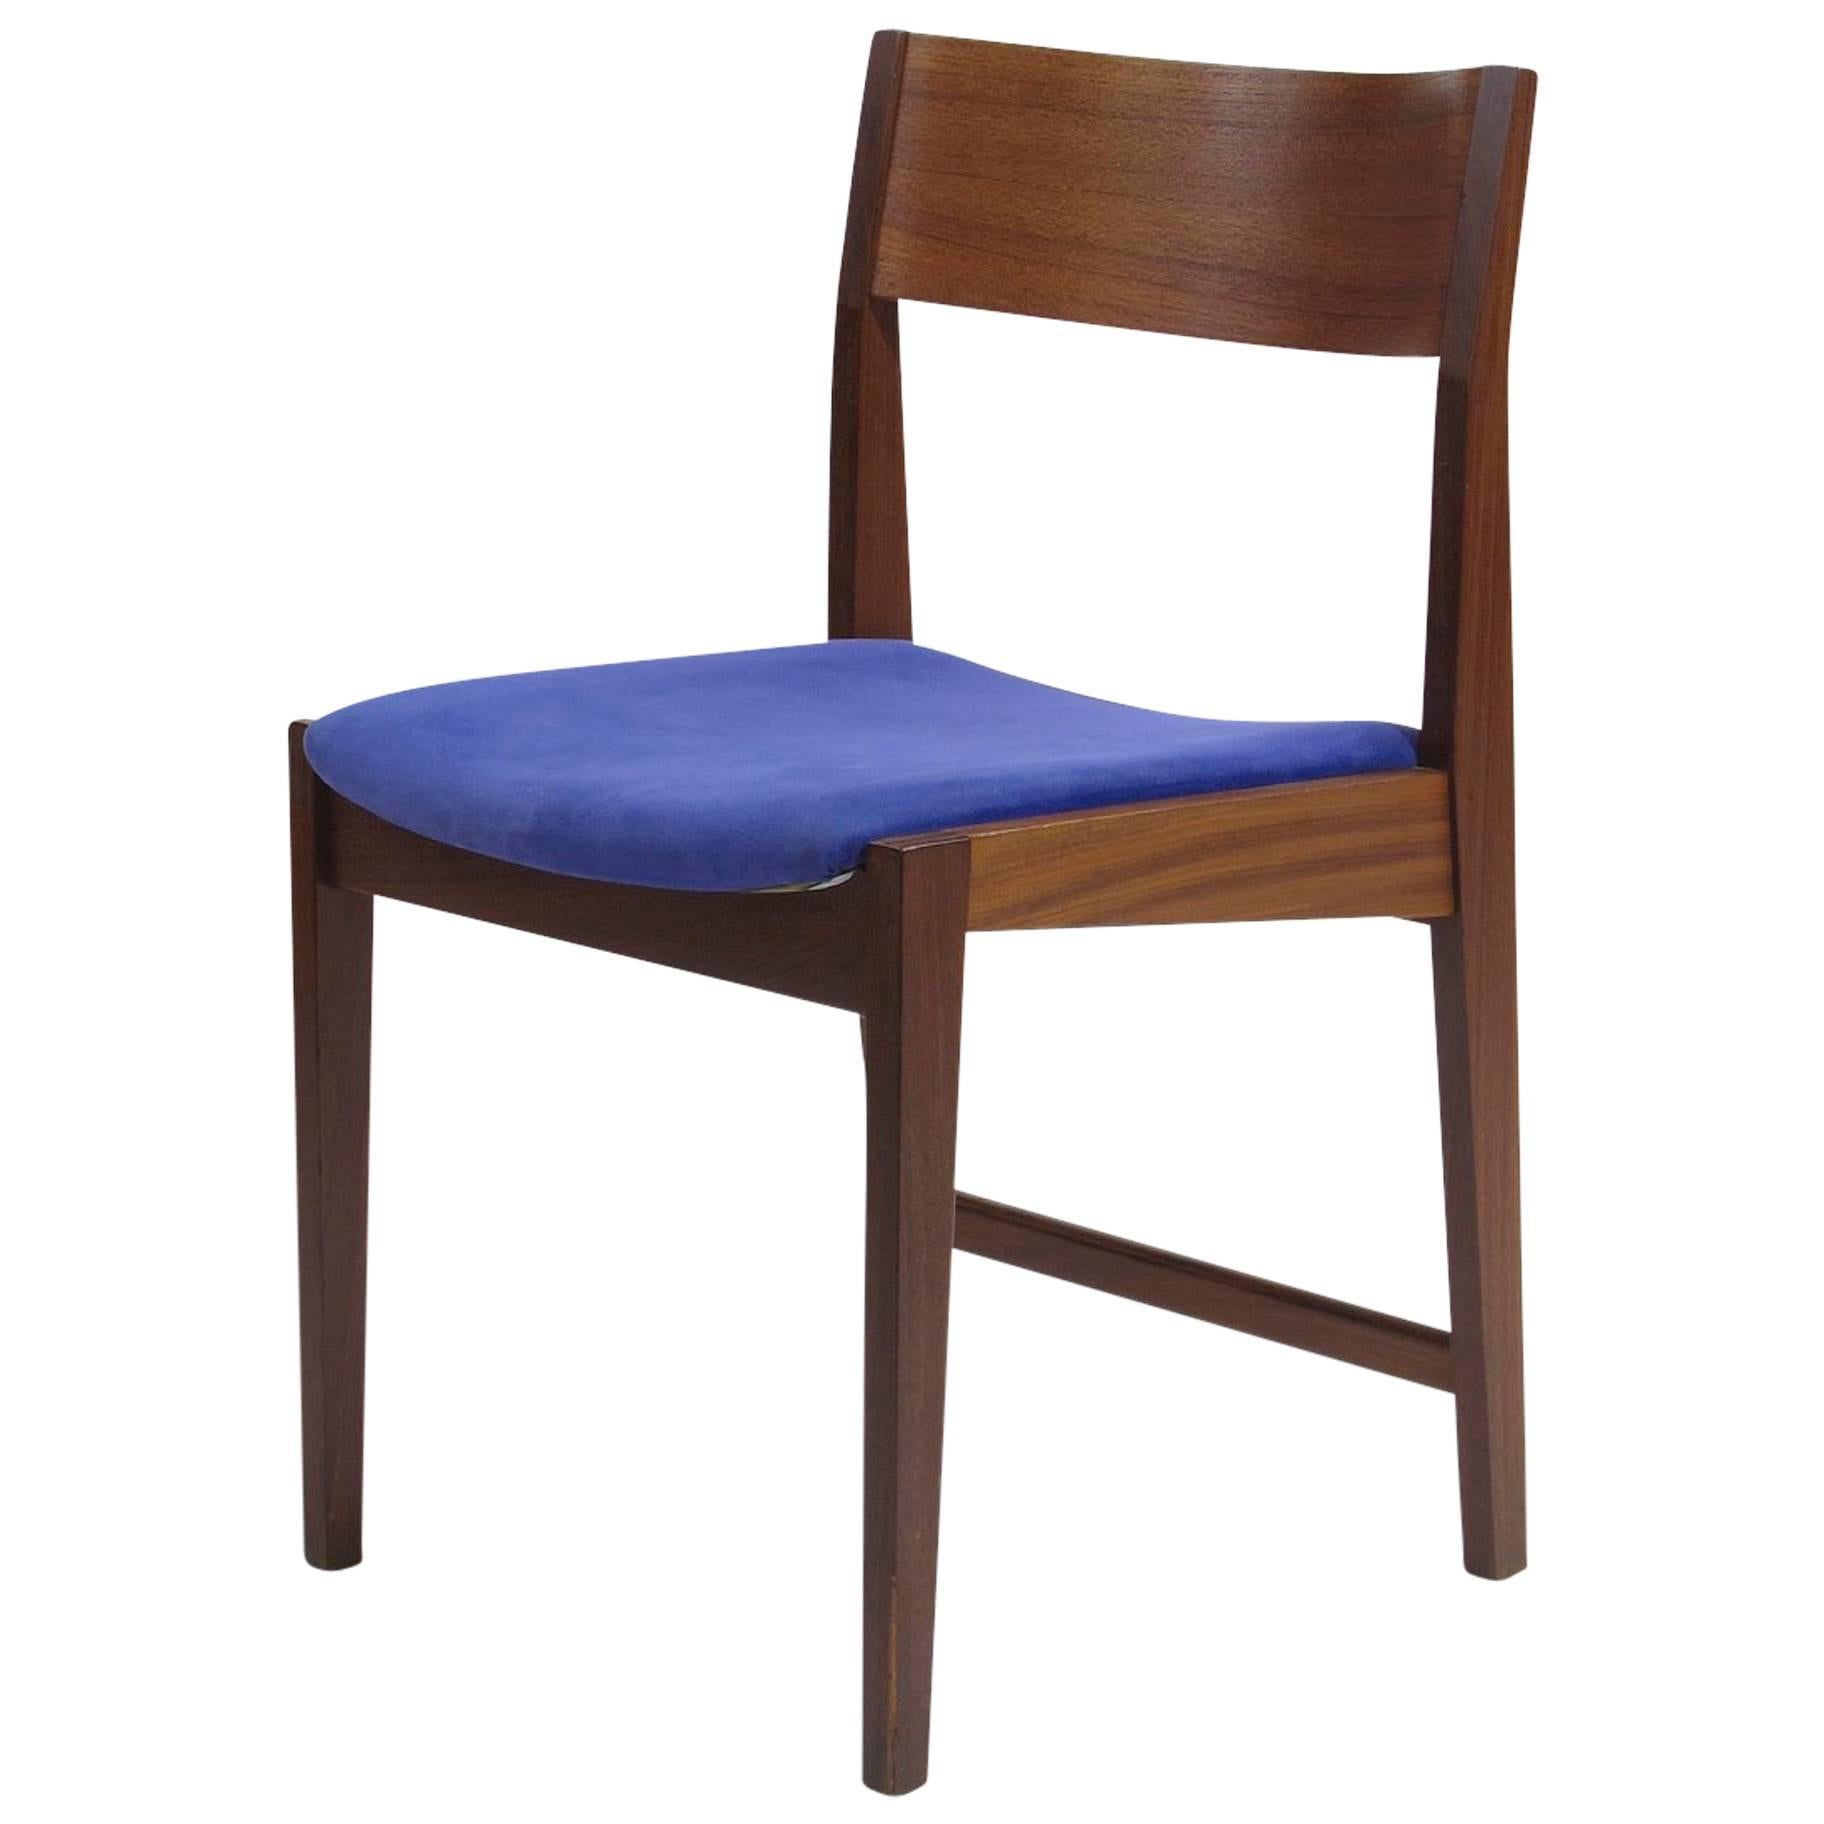 Mid-Century dining chairs attributed to Paul Cadovius for Cado. Crafted of solid walnut frames with dramatic curved backrests of teak. Solid construction, great for a residential or commercial environment. Upholstered in vintage blue ultra suede.